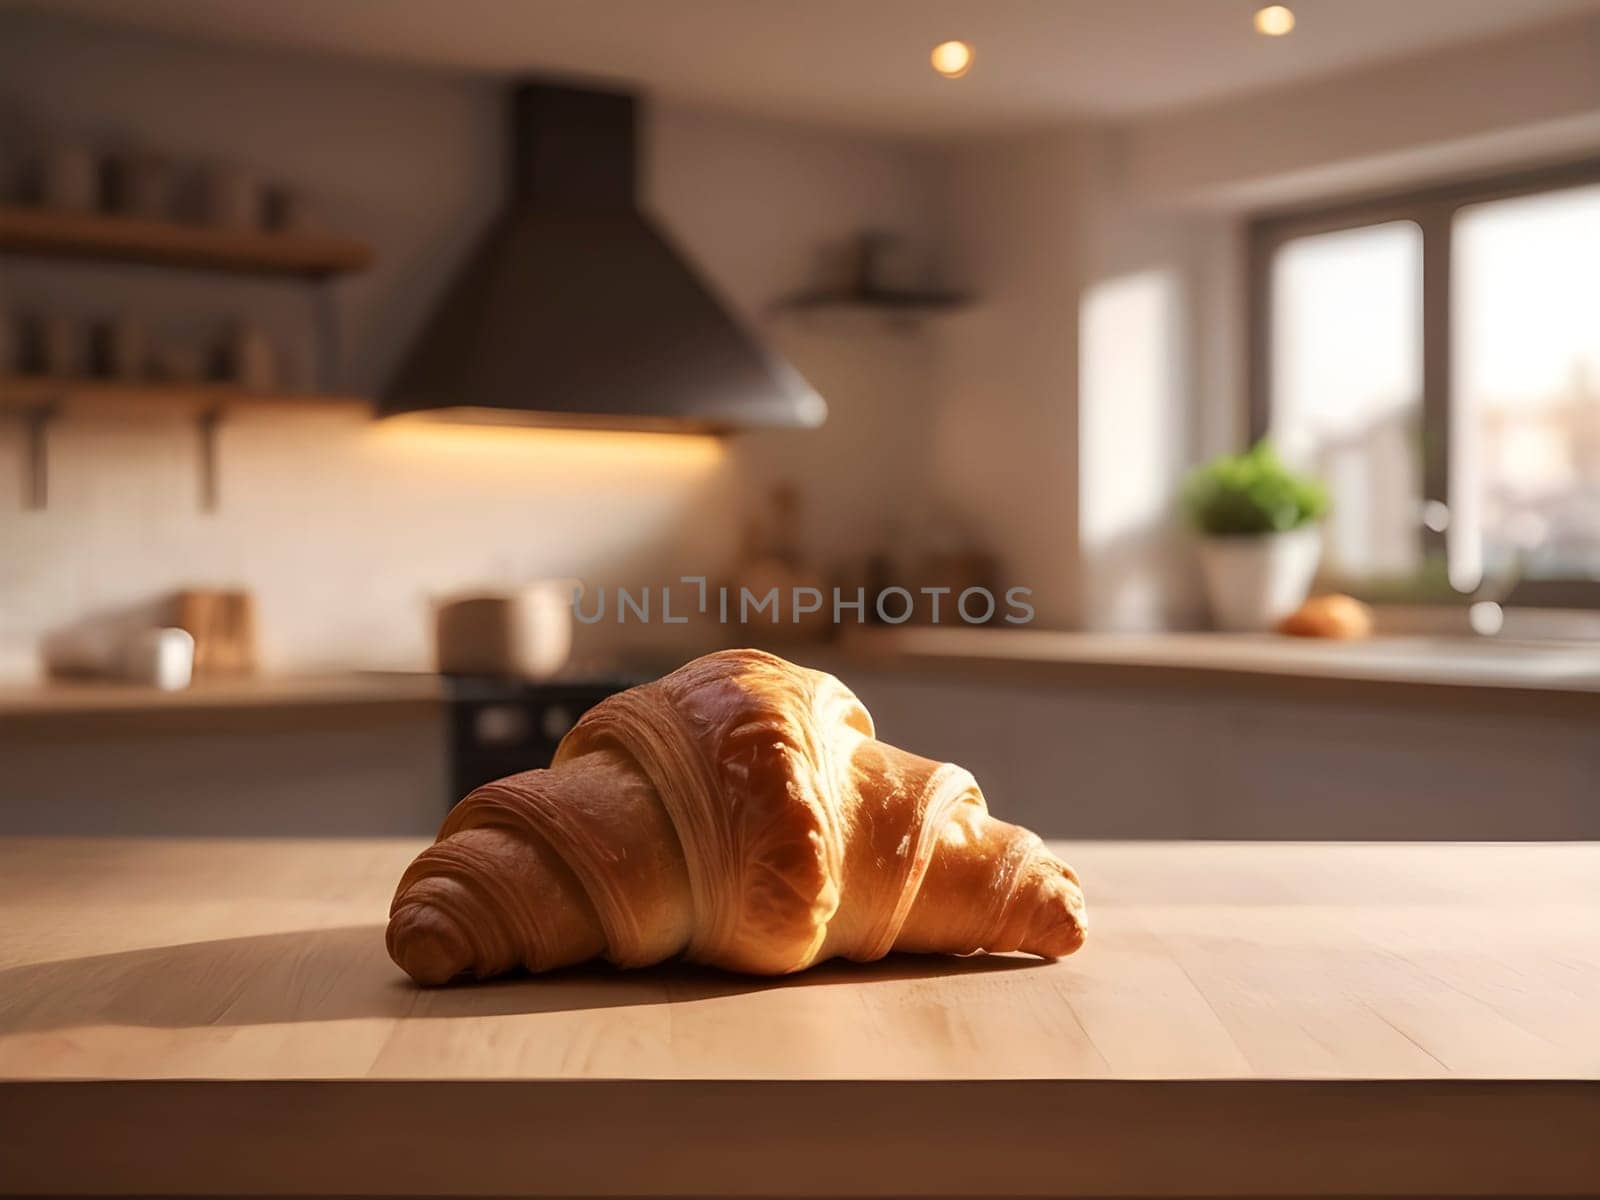 Golden Glow: Croissant in Focus, Kitchen Bathed in Afternoon Warmth by mailos